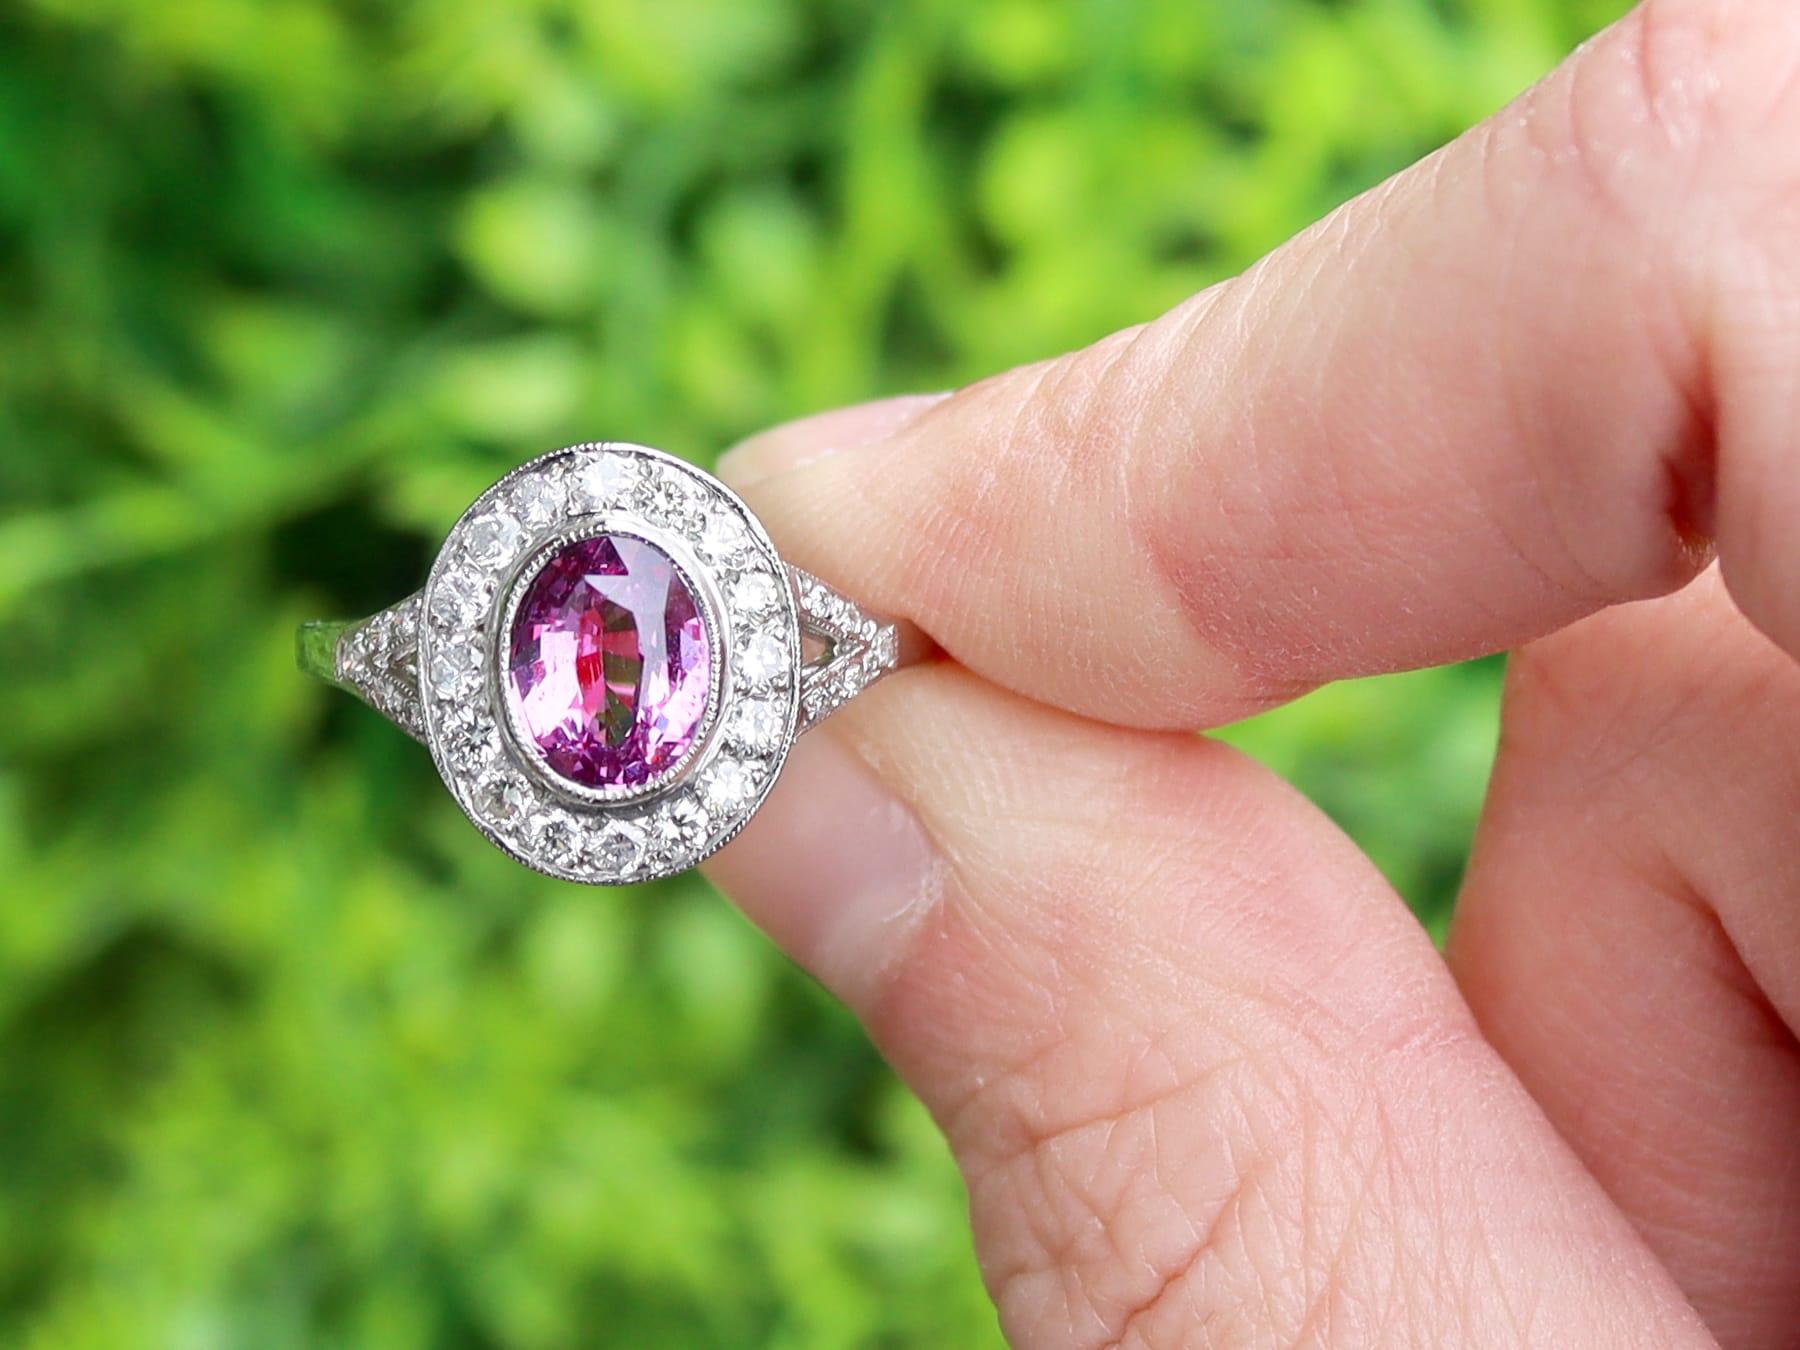 A fine and impressive 1.88 carat pink sapphire and 0.56 carat diamond, and platinum dress ring; part of our diverse vintage sapphire engagement rings collection

This fine and impressive pink sapphire and diamond ring has been crafted in